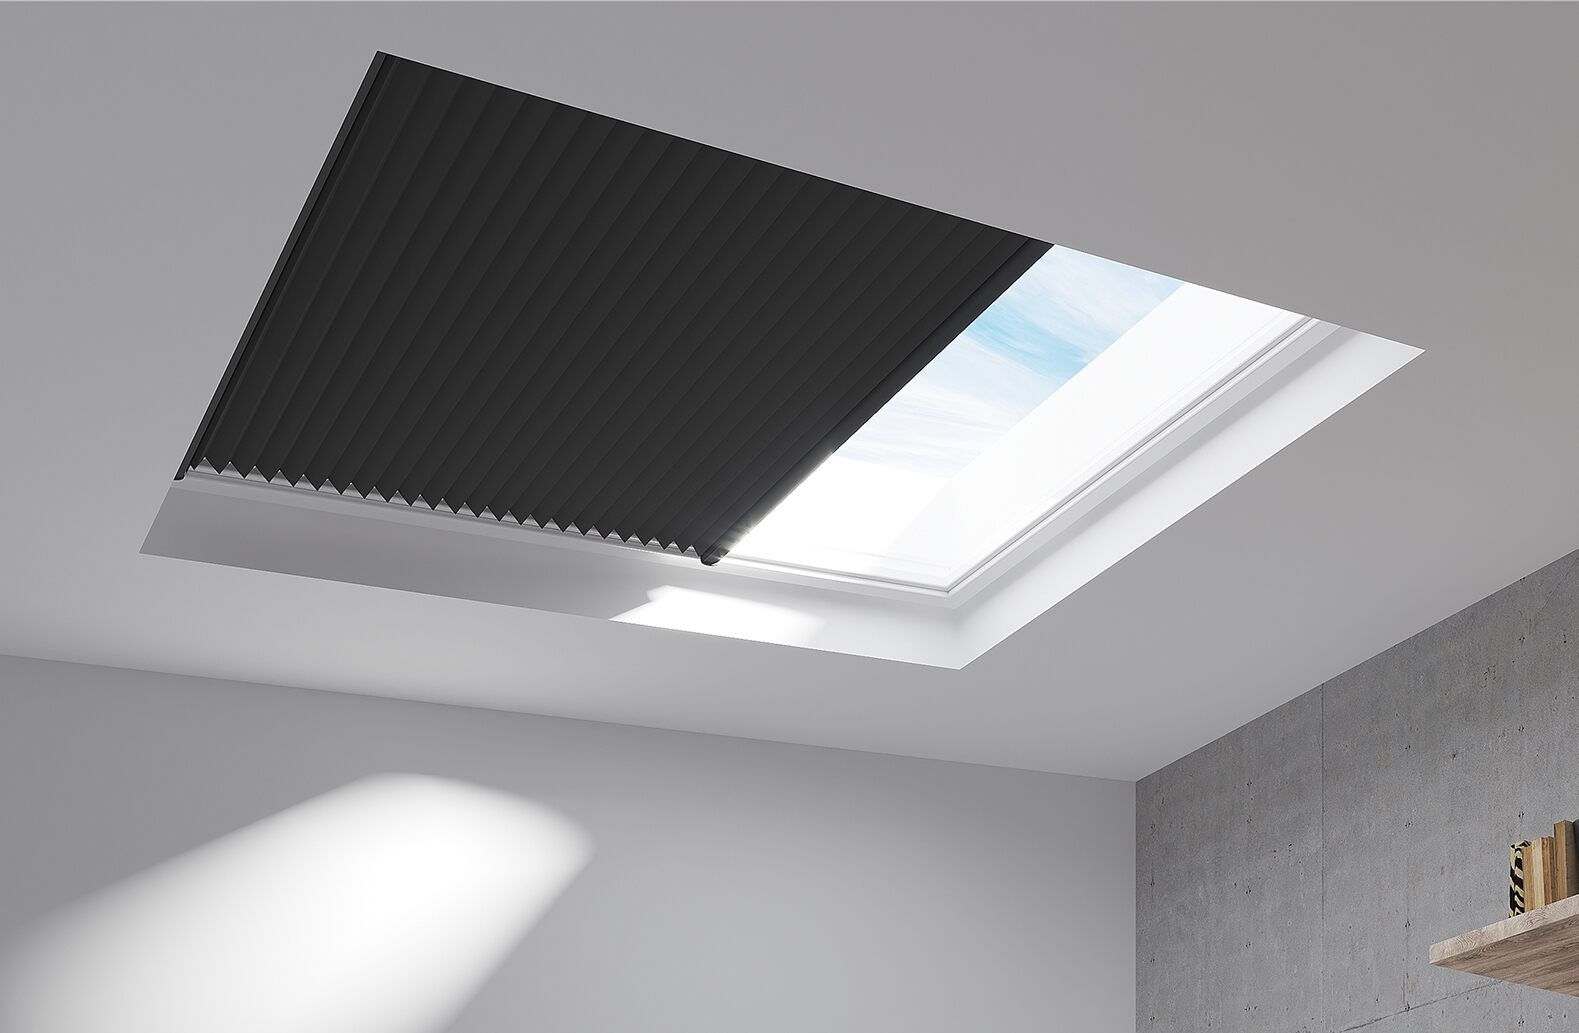 How To Blackout Skylight